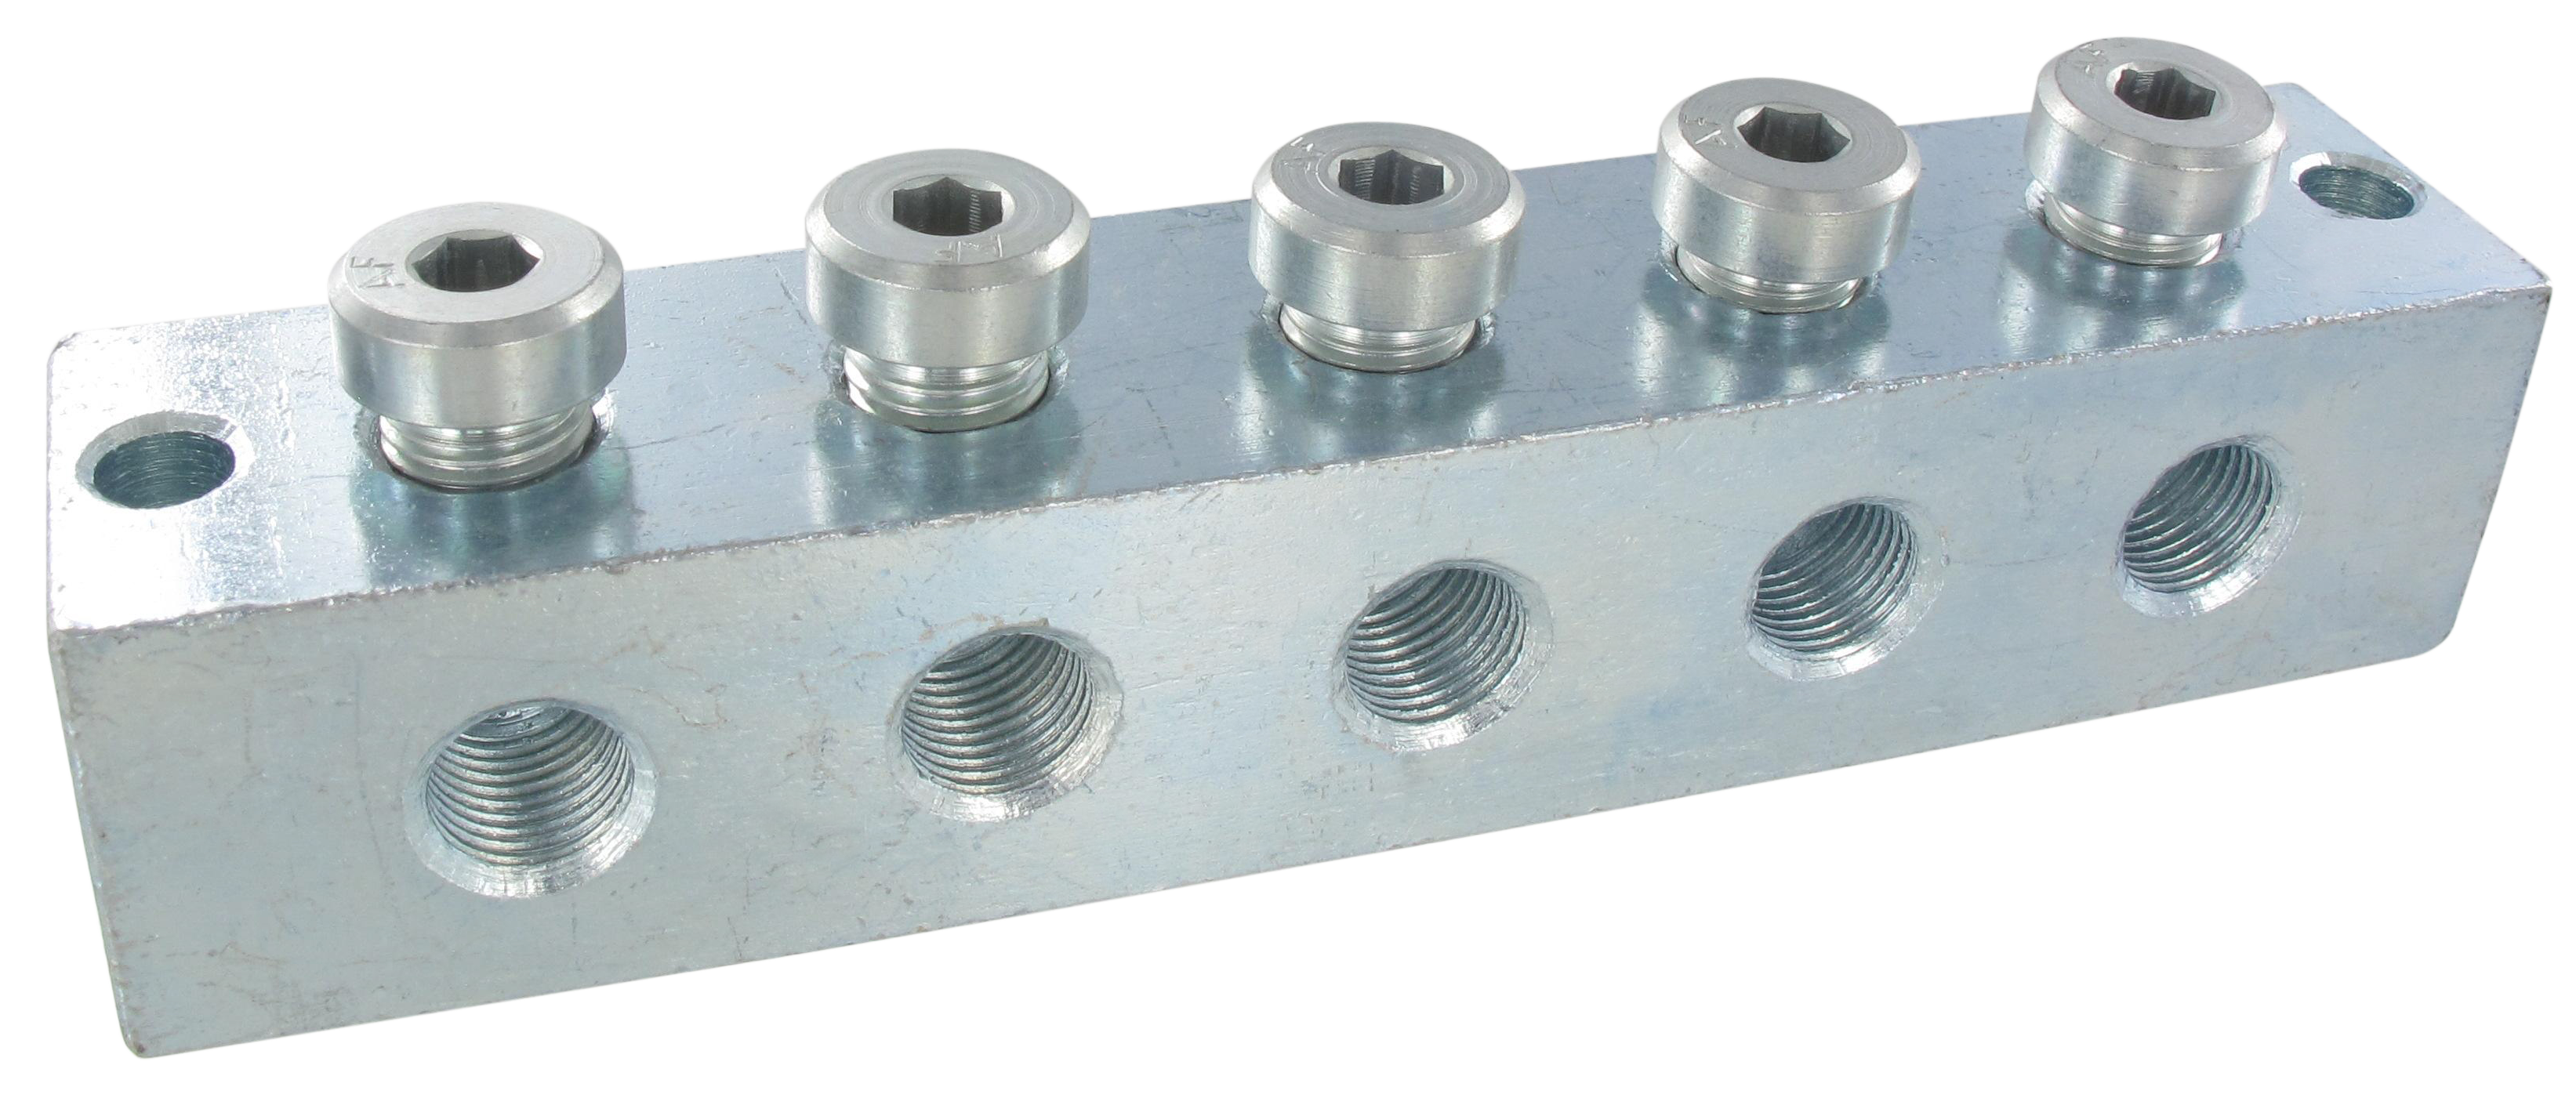 Threaded T-connector manifold M10x1 with 5 connections in galvanised steel